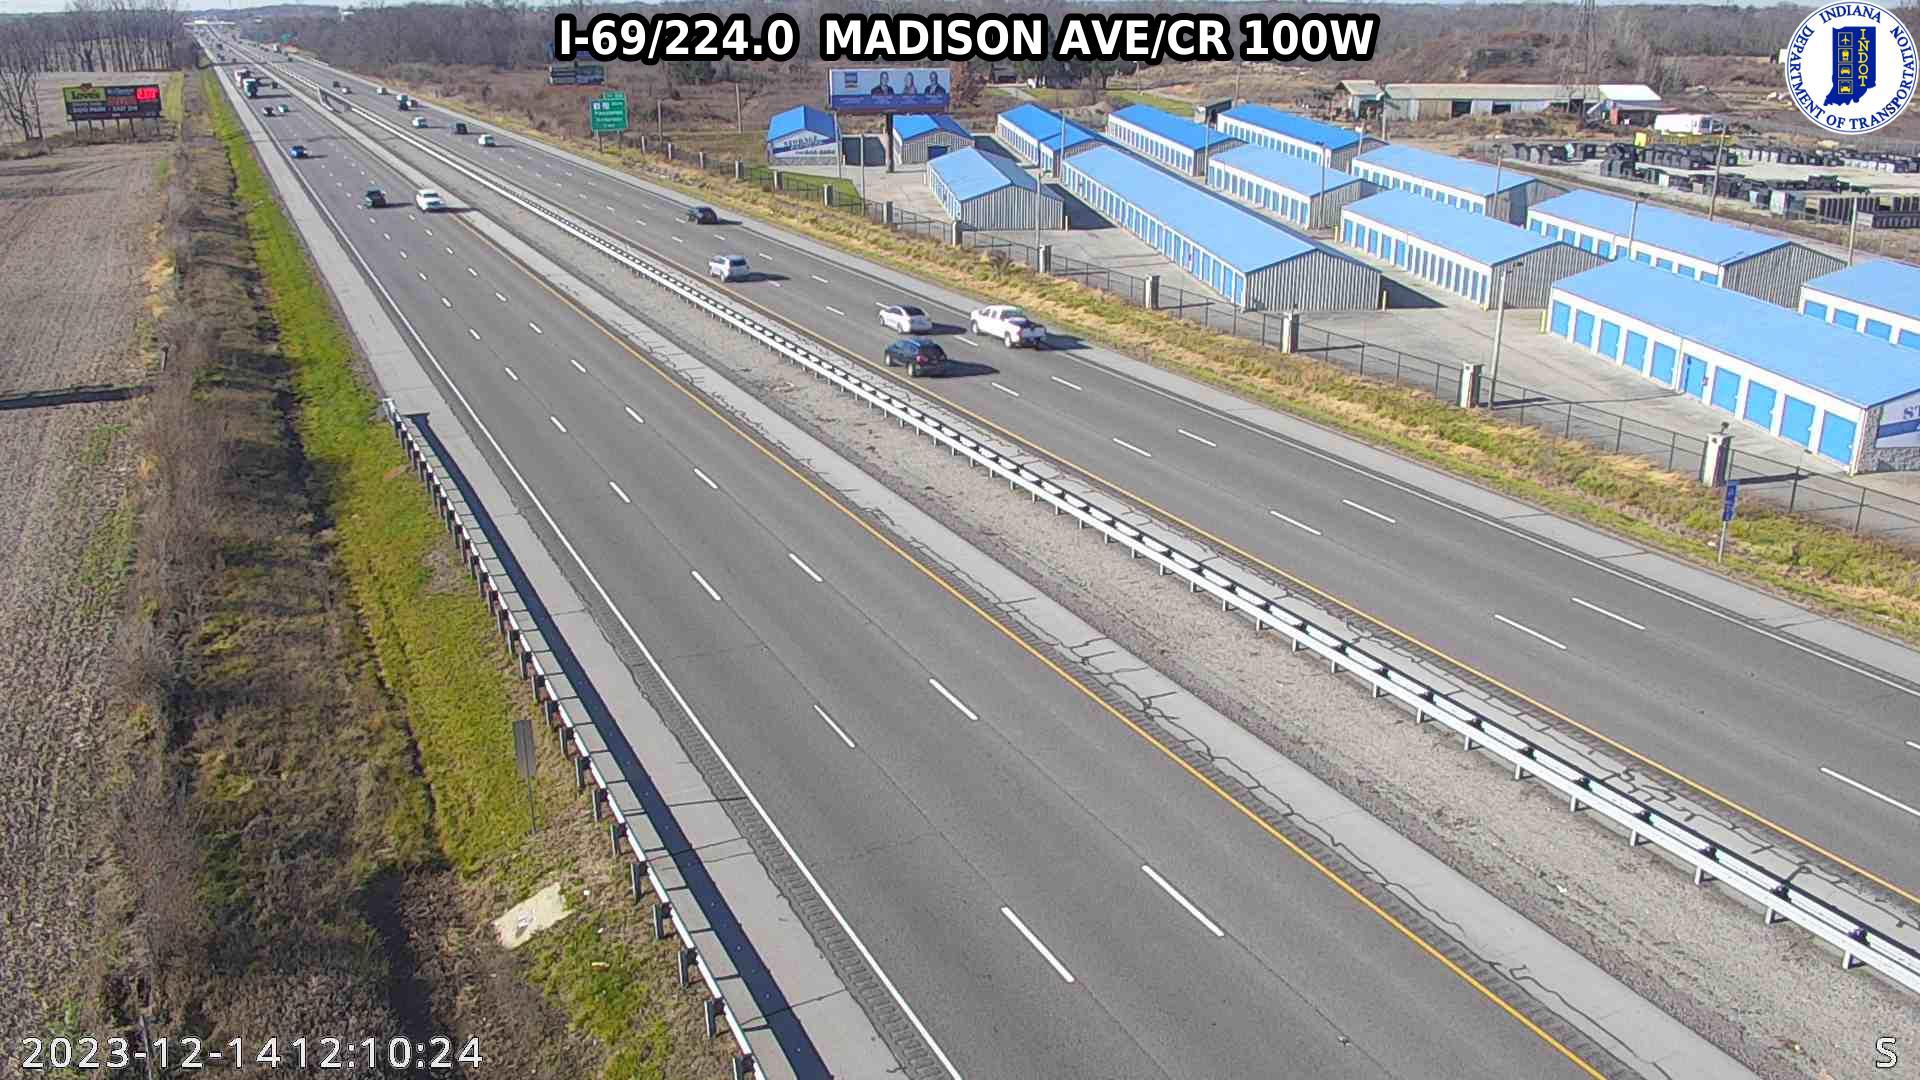 Traffic Cam Harmeson Heights: I-69: I-69/224.0 MADISON AVE/CR 100W Player